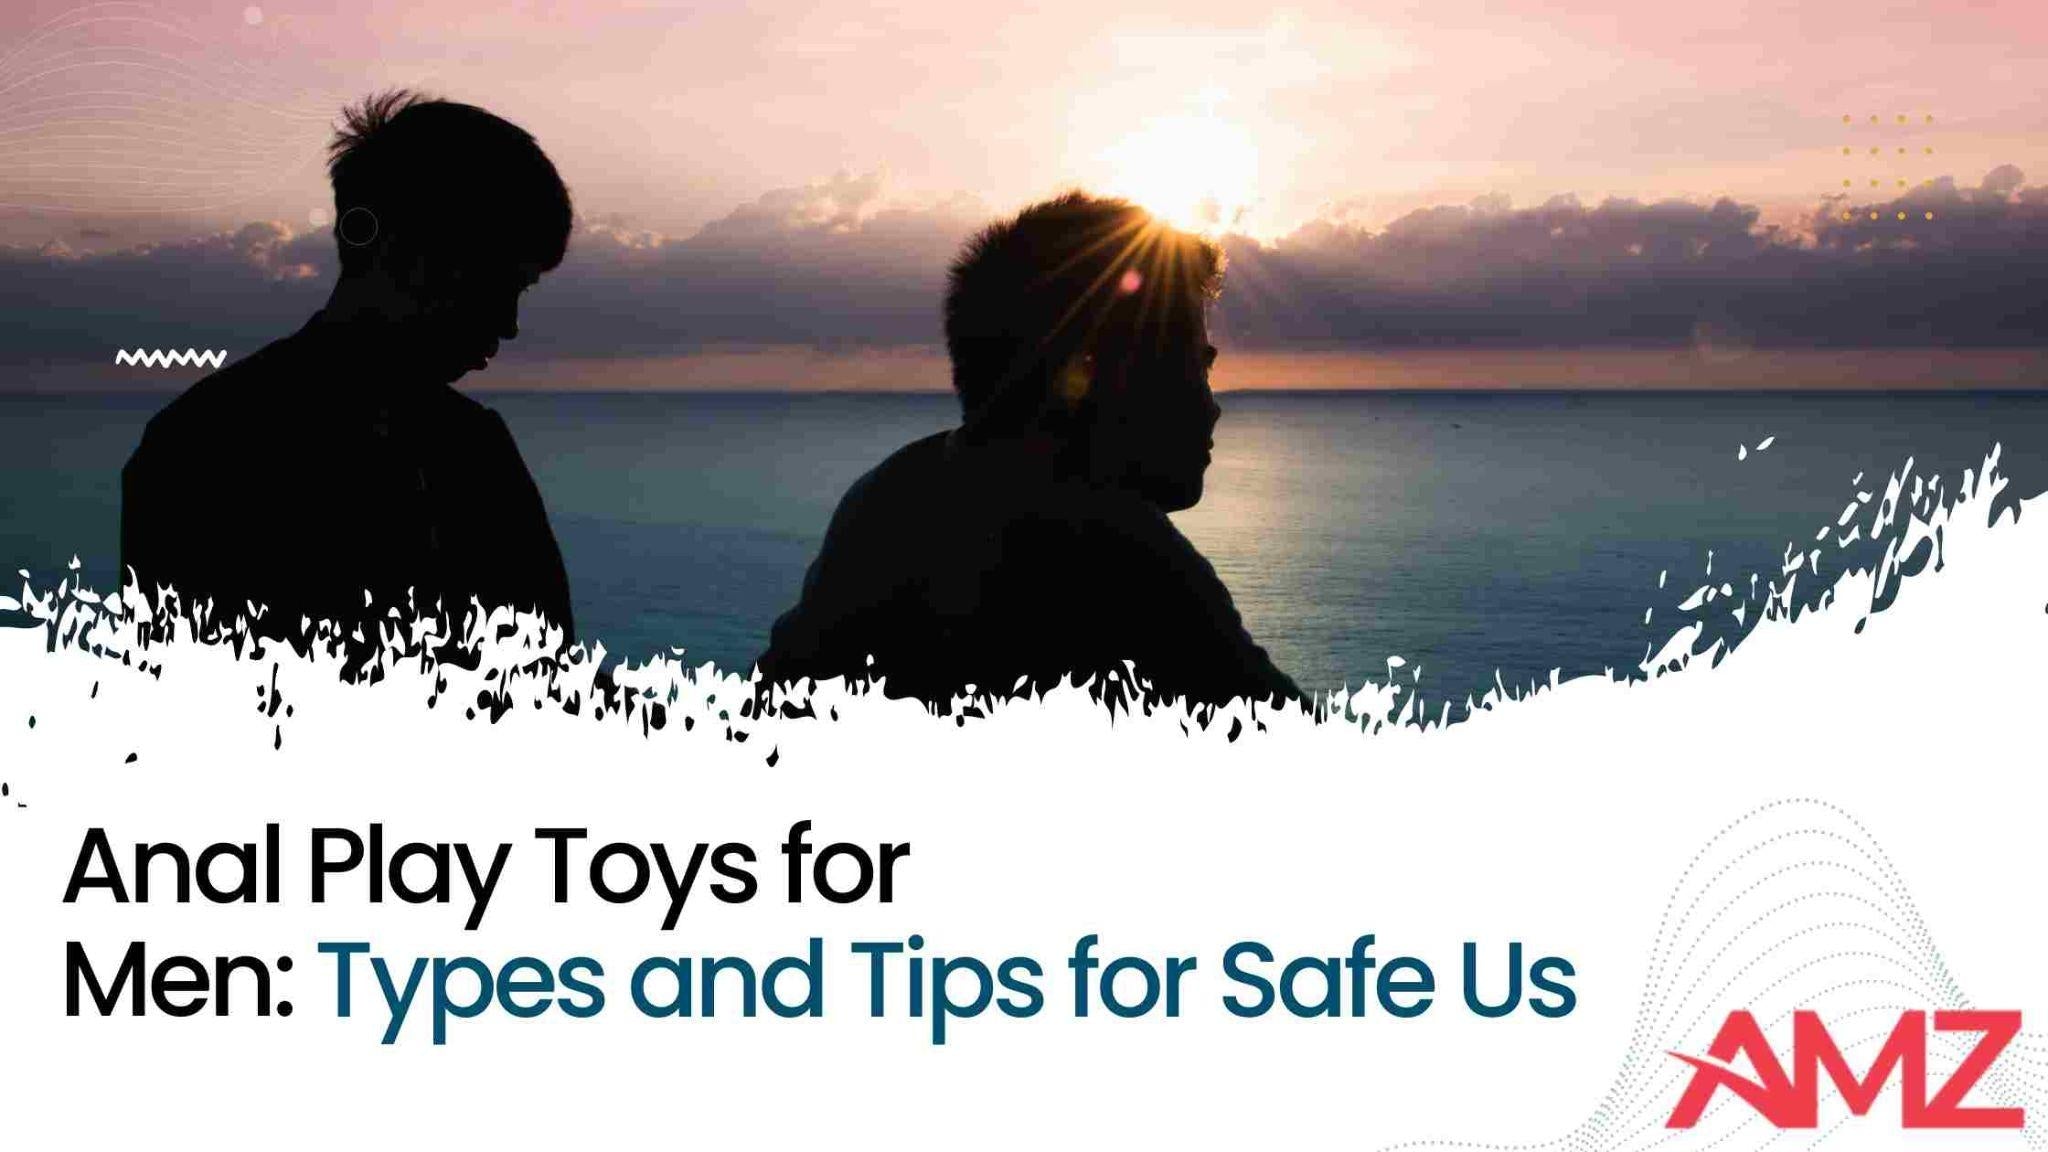 Anal Play Toys for Men: Types and Tips for Safe Use